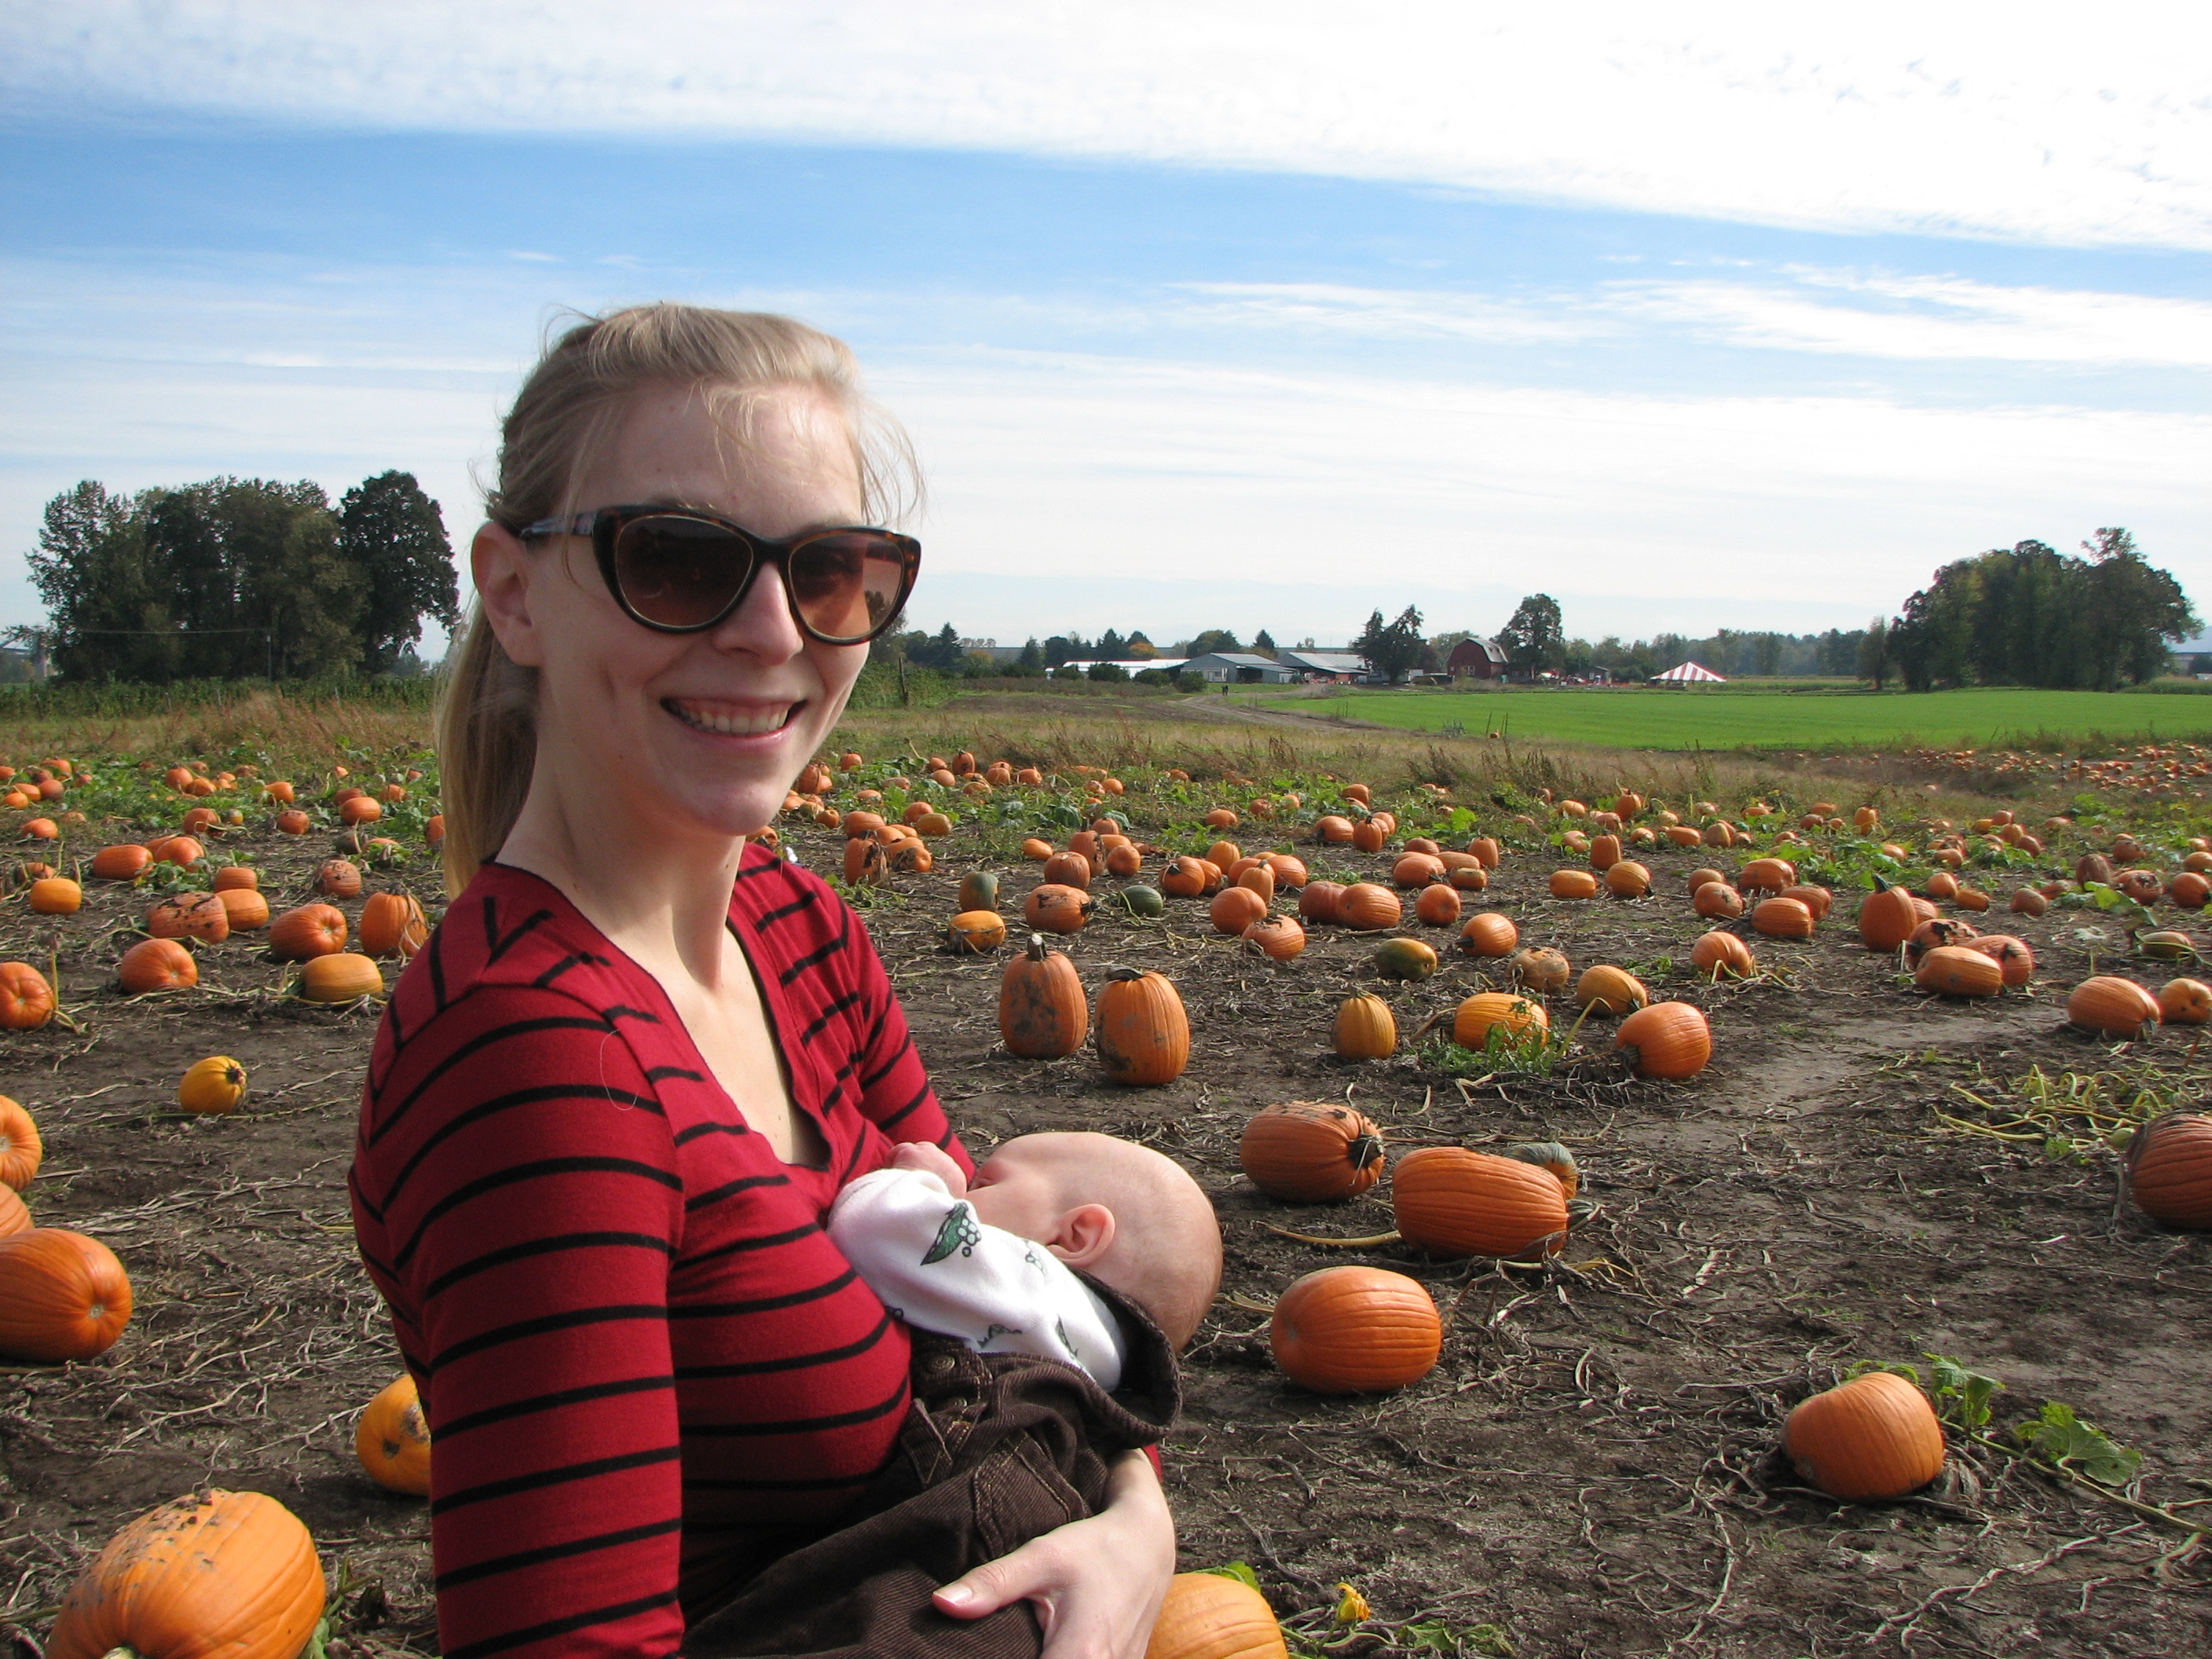 A baby's hunger waits for no one, so you gotta feed her where you can—even the pumpkin patch.